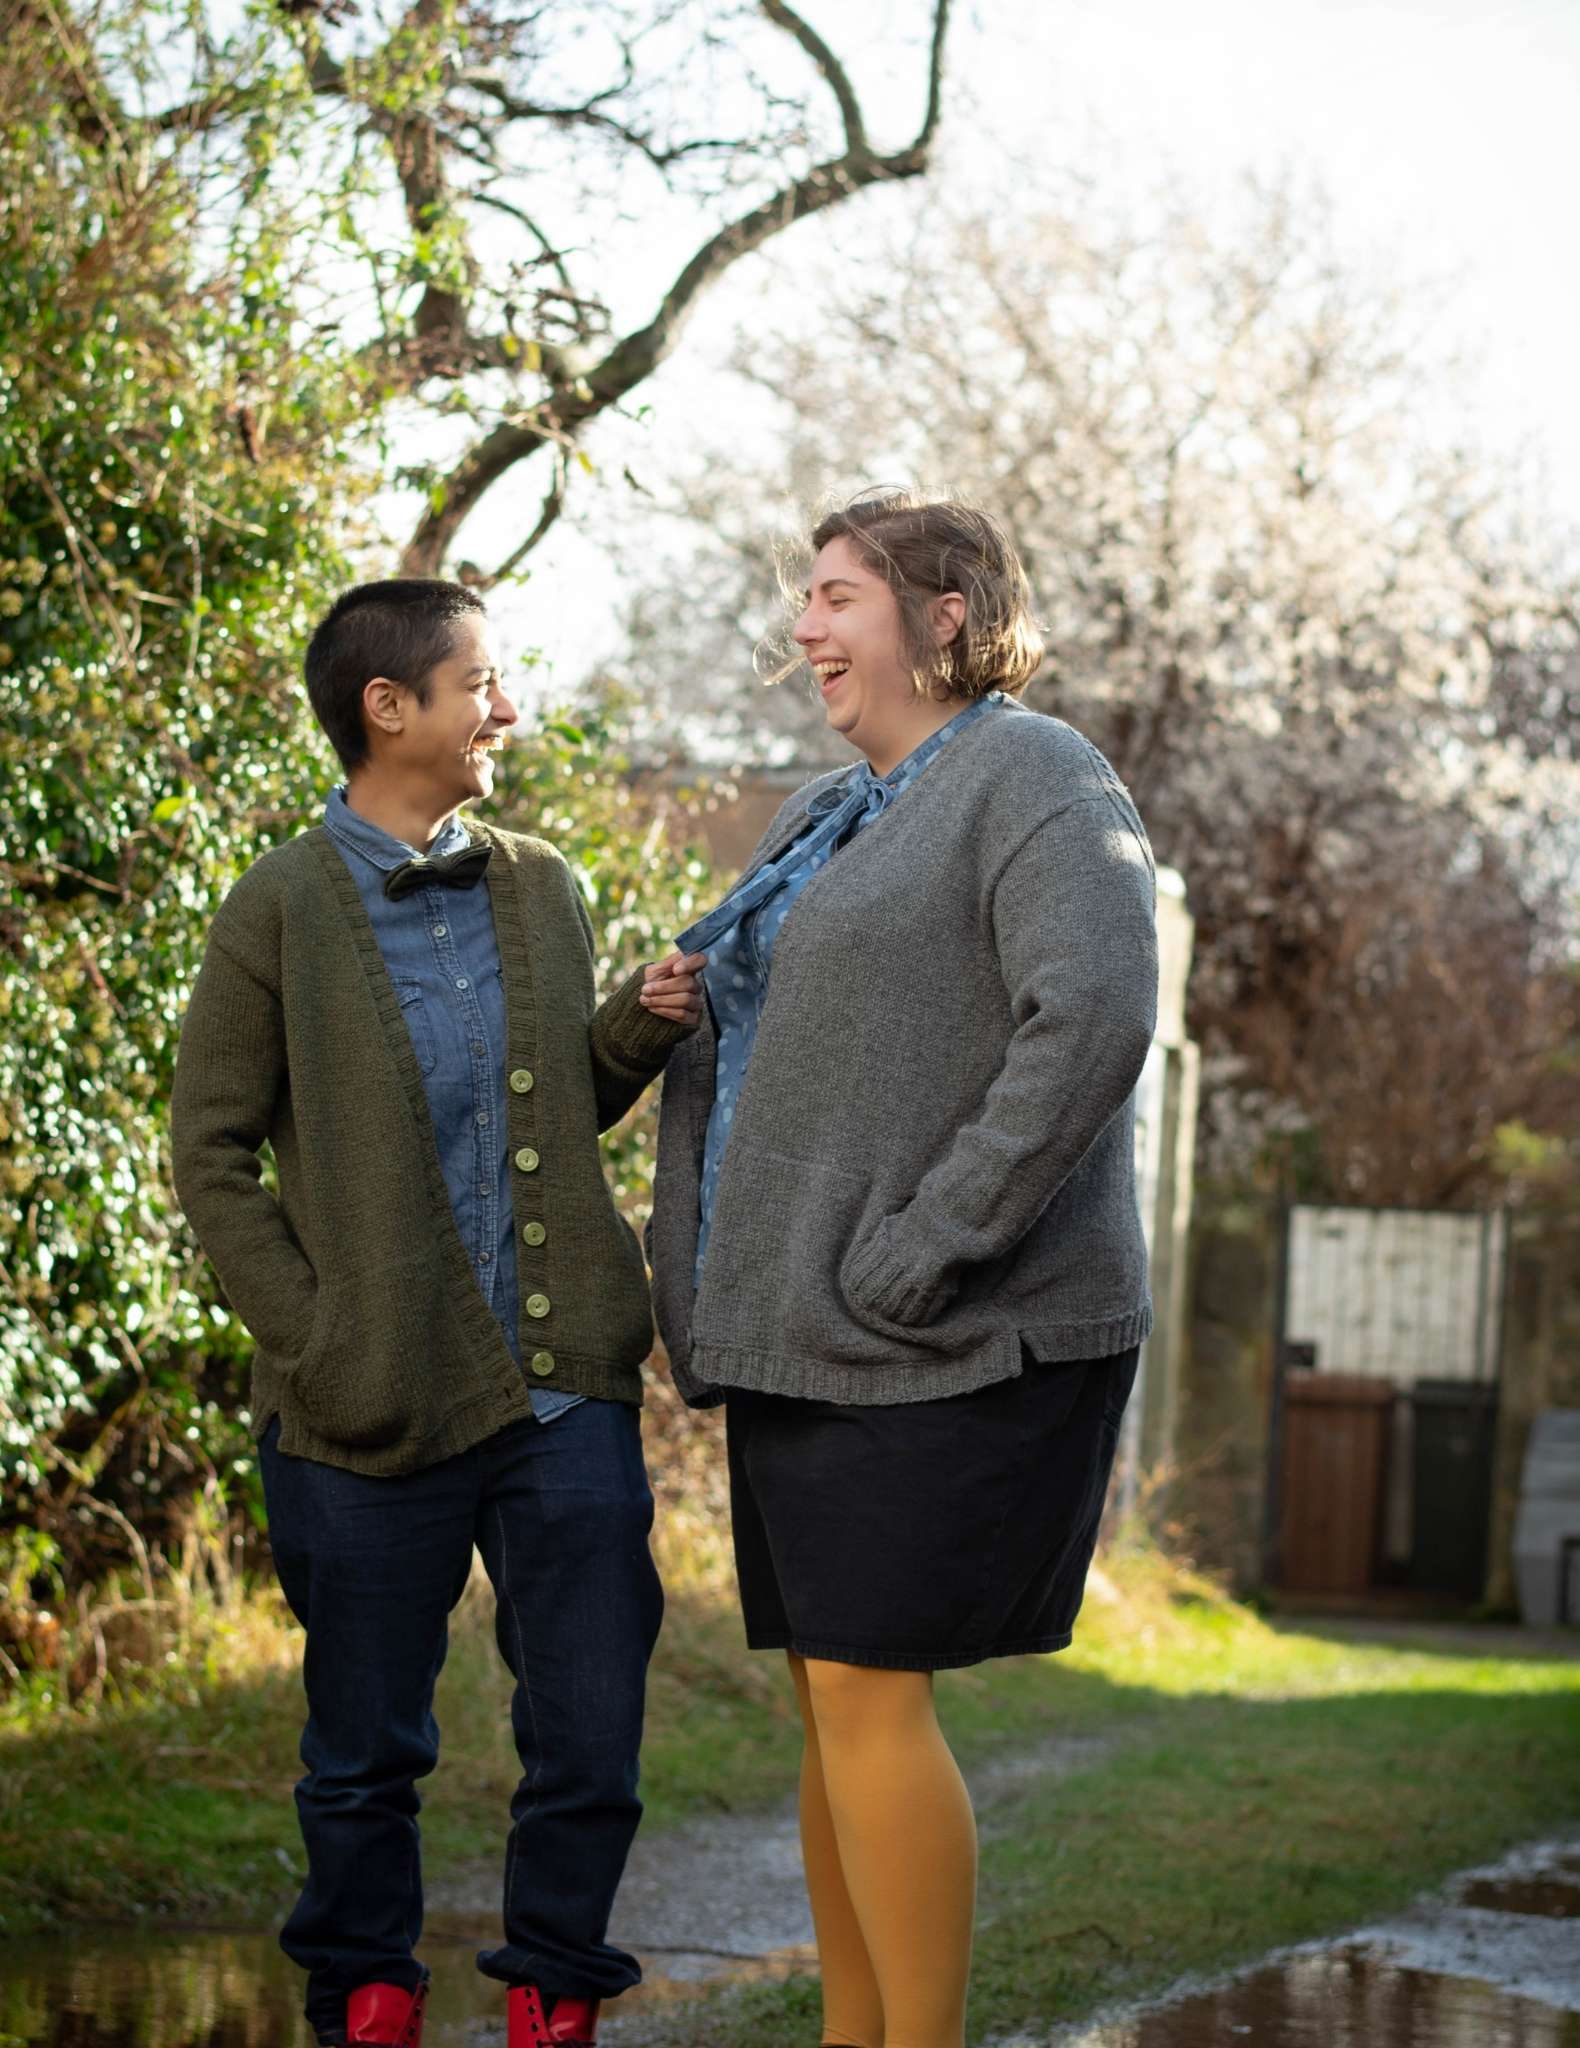 Two models wearing open, cardigans stand underneath some trees on a path through grass. They face each other and one holds the other's scarf, they are smiling at each other.